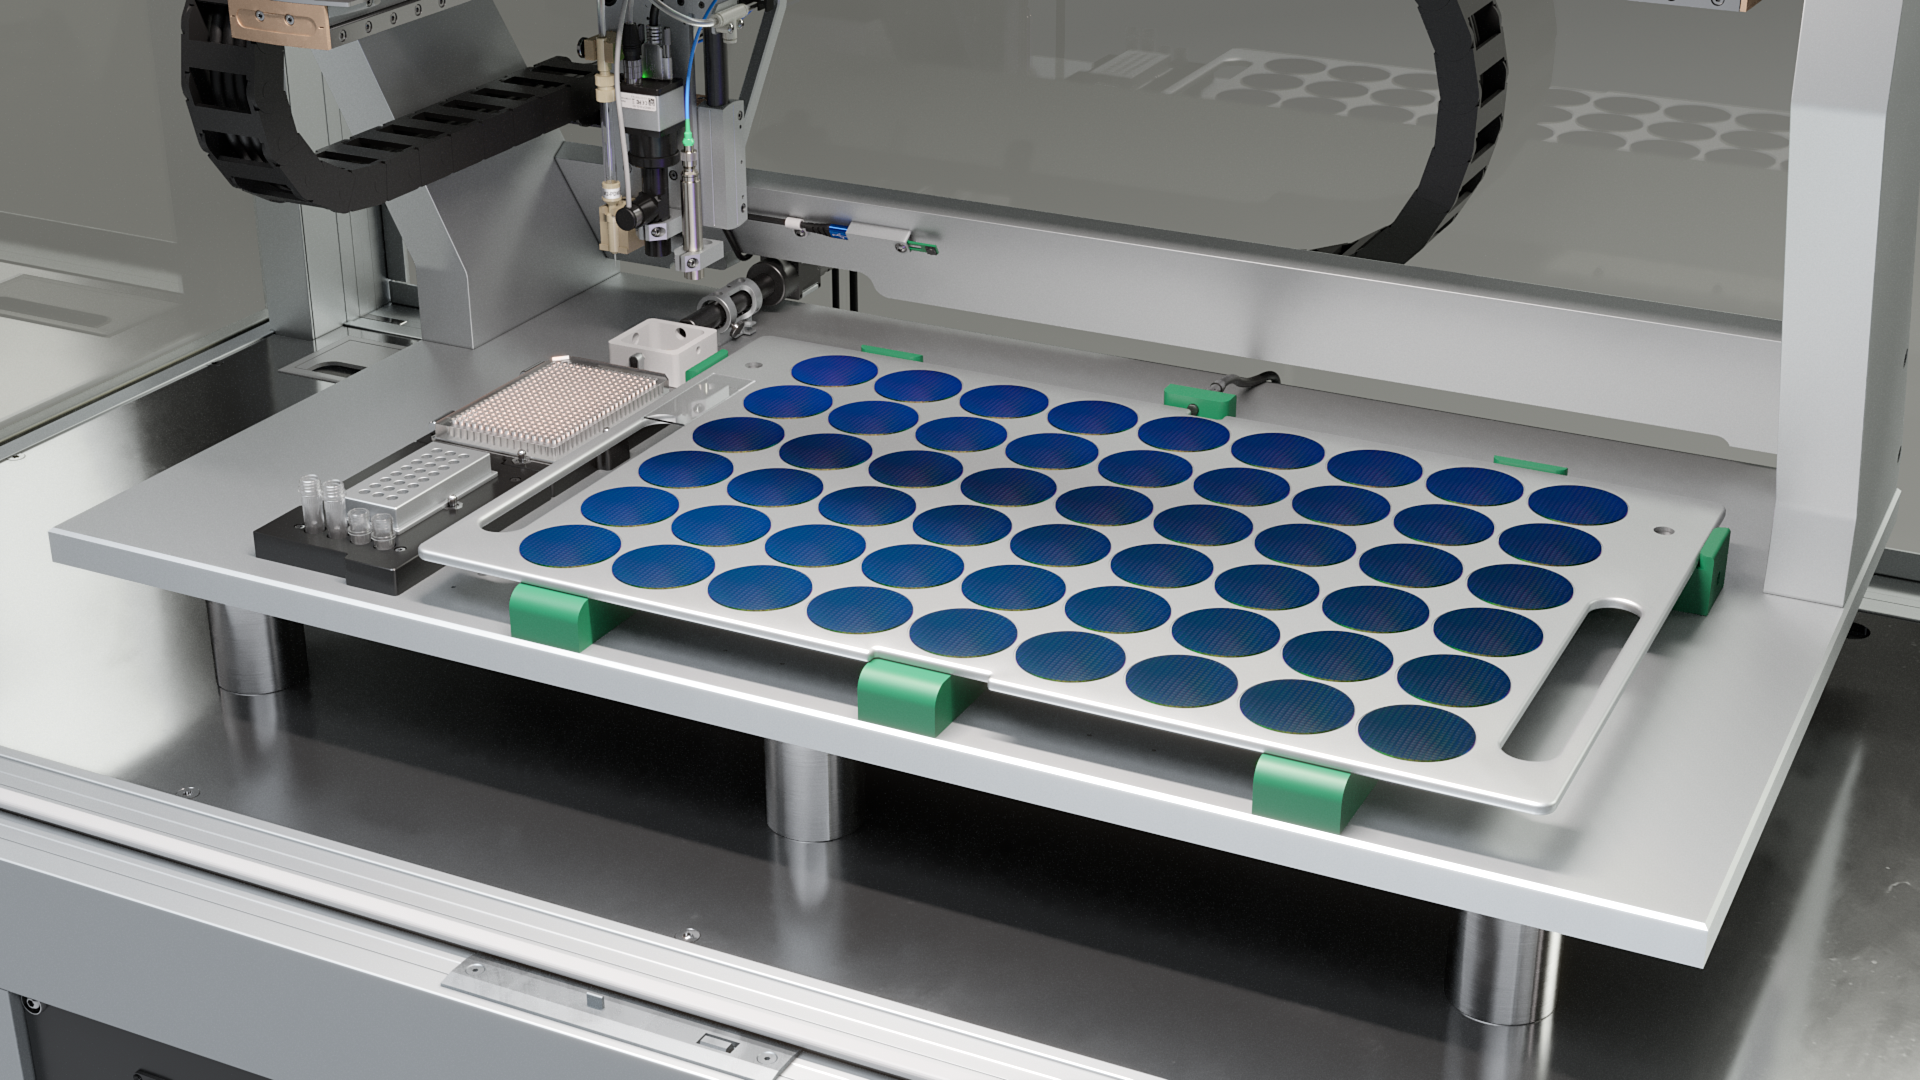 iONE Microarray Printer view inside to show a custom target tray system with silicon wafers